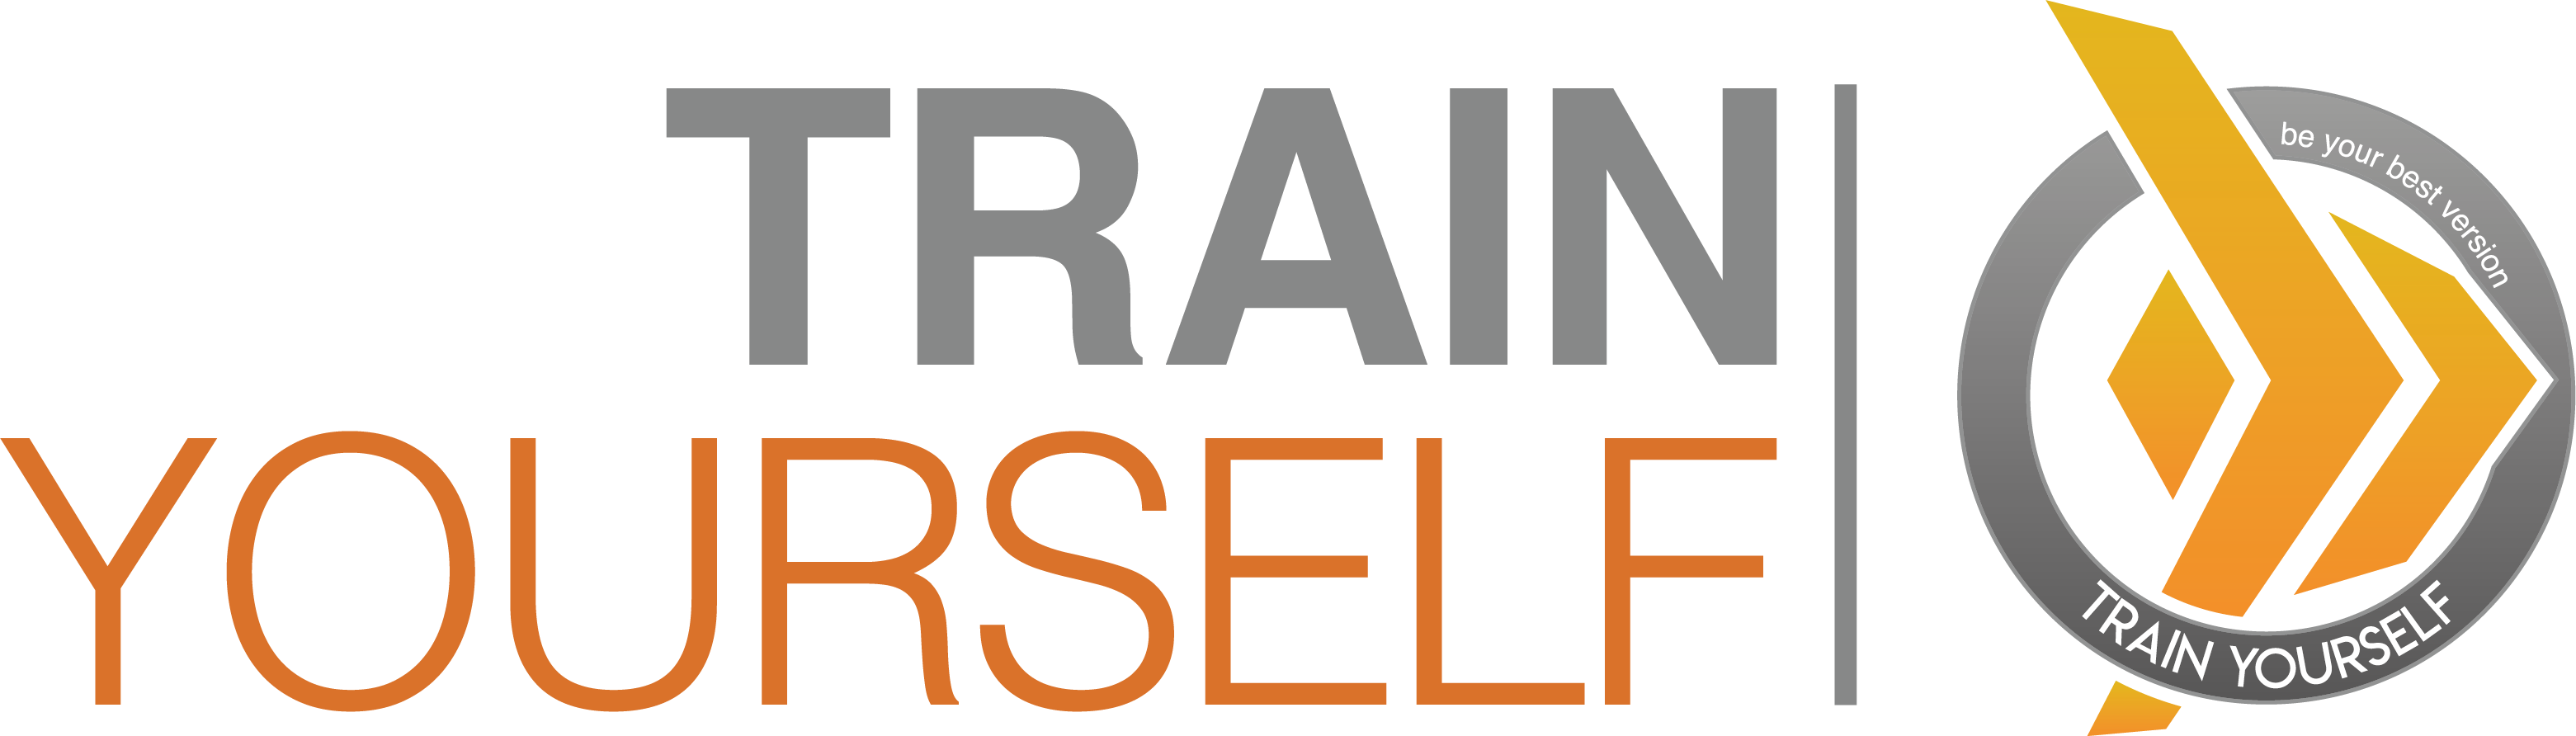 TrainYourself Coupons and Promo Code